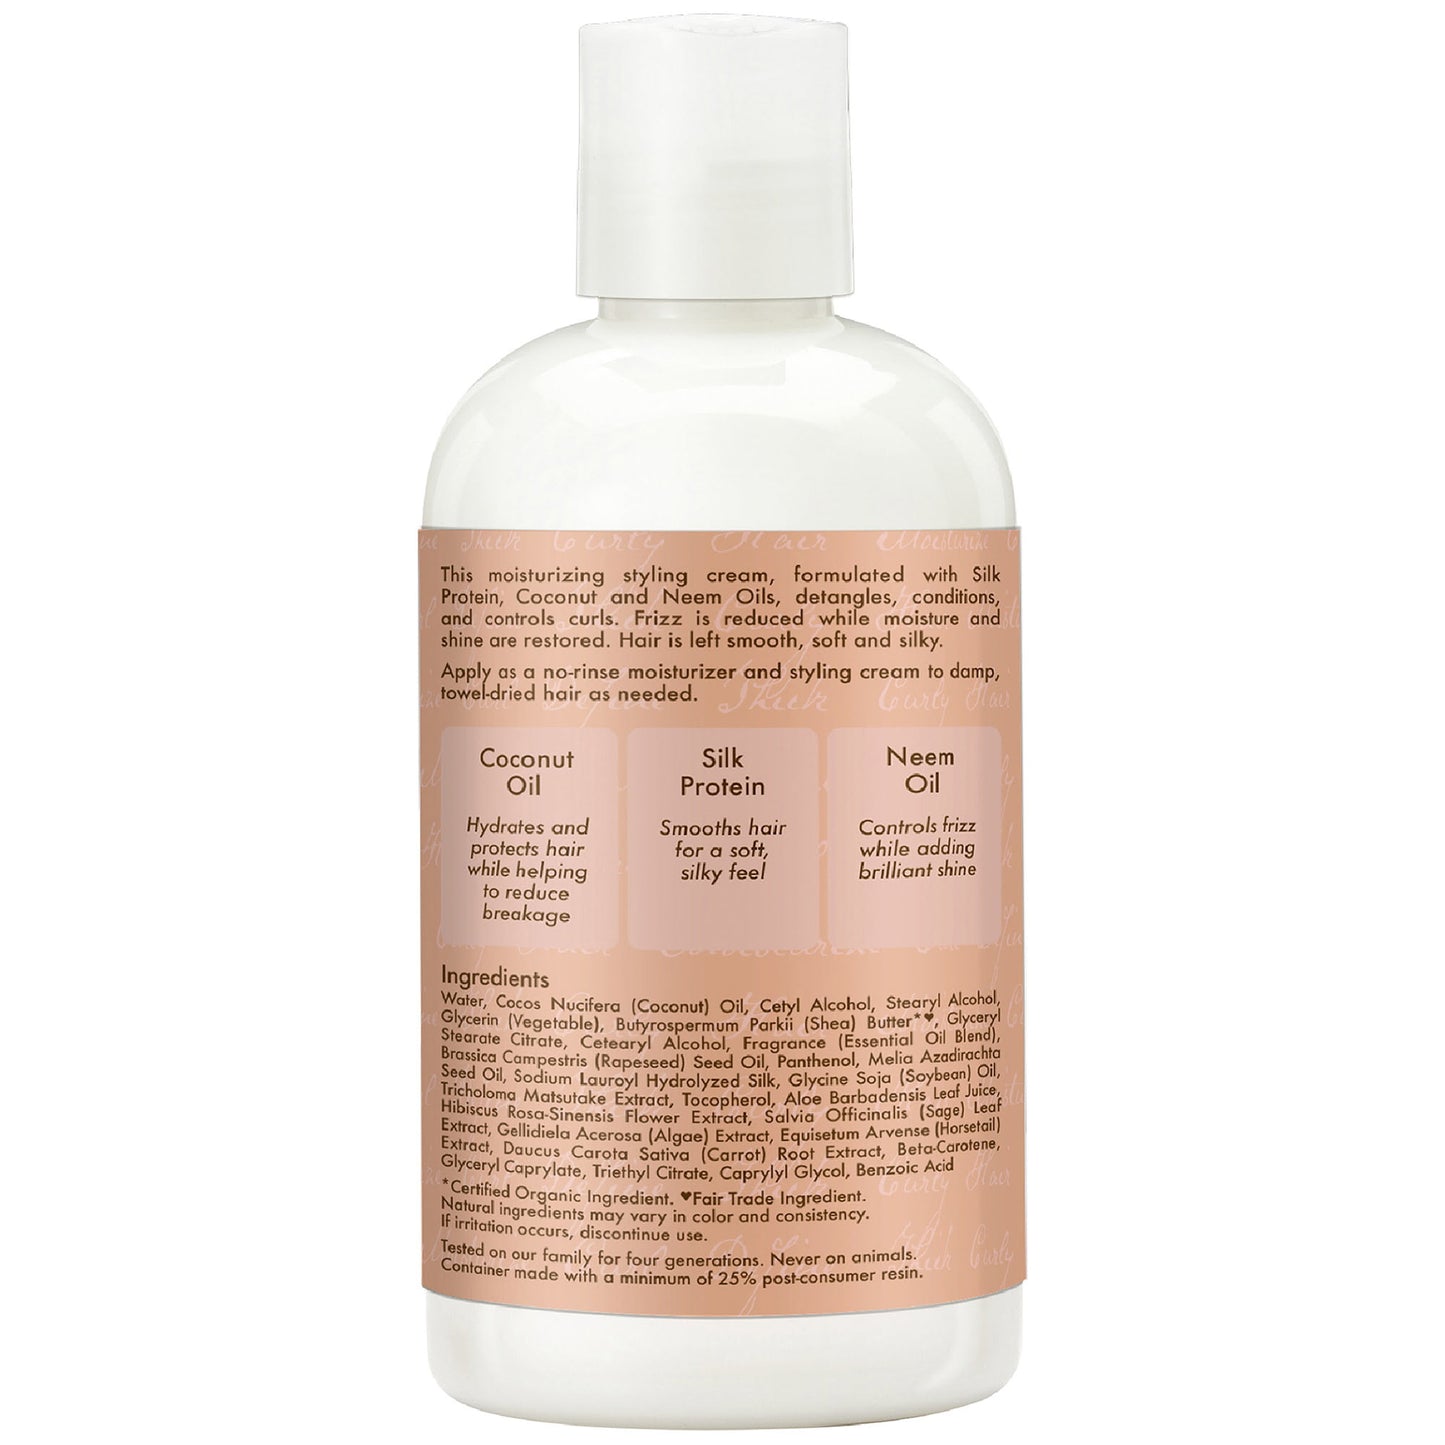 SheaMoisture Curl Enhancing Style Milk, Coconut and Hibiscus Frizz Control Sulfate Free 8, oz